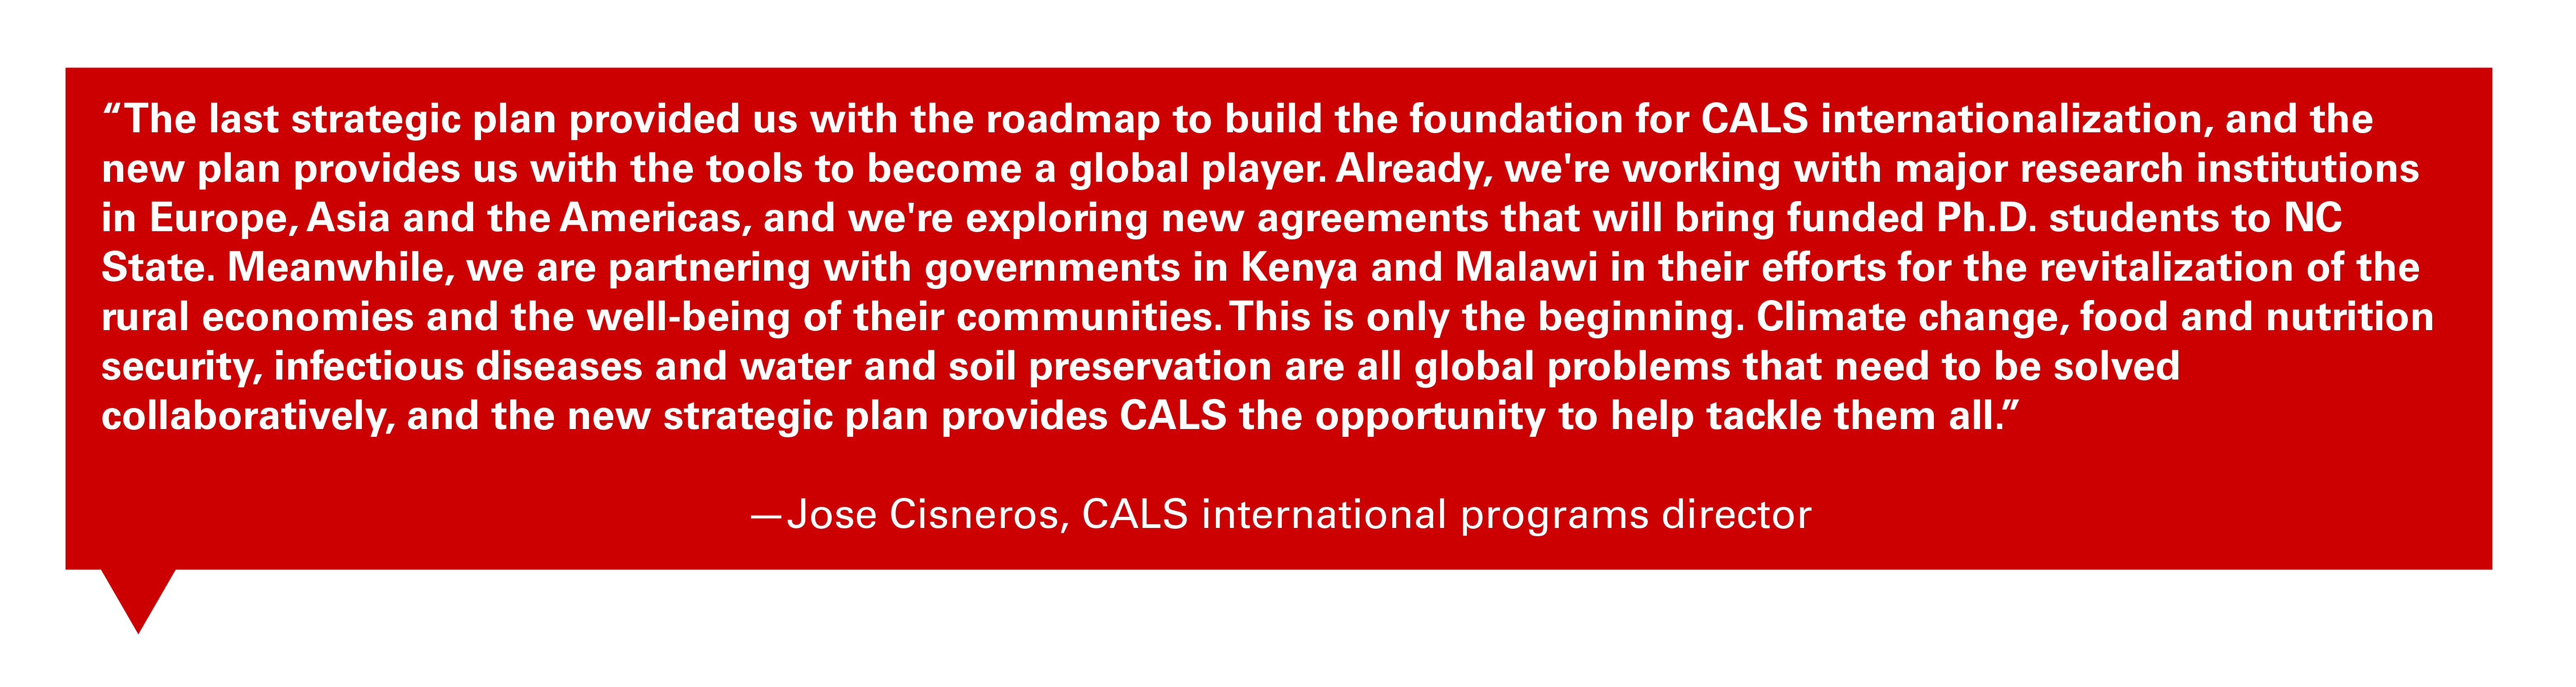 Quote from Jose Cisneros, CALS international programs director: "The last strategic plan provided us with the roadmap to build the foundation for CALS internationalization, and the new plan provides us with the tools to become a global player. Already, we're working with major research institutions in Europe, Asia and the Americas, and we're exploring new agreements that will bring funded Ph.D. students to NC State. Meanwhile, we are partnering with governments in Kenya and Malawi in their efforts for the revitalization of the rural economies and the well-being of their communities. This is only the beginning. Climate change, food and nutrition security, infectious diseases and water and soil preservation are all global problems that need to be solved collaboratively, and the new strategic plan provides CALS the opportunity to help tackle them all."